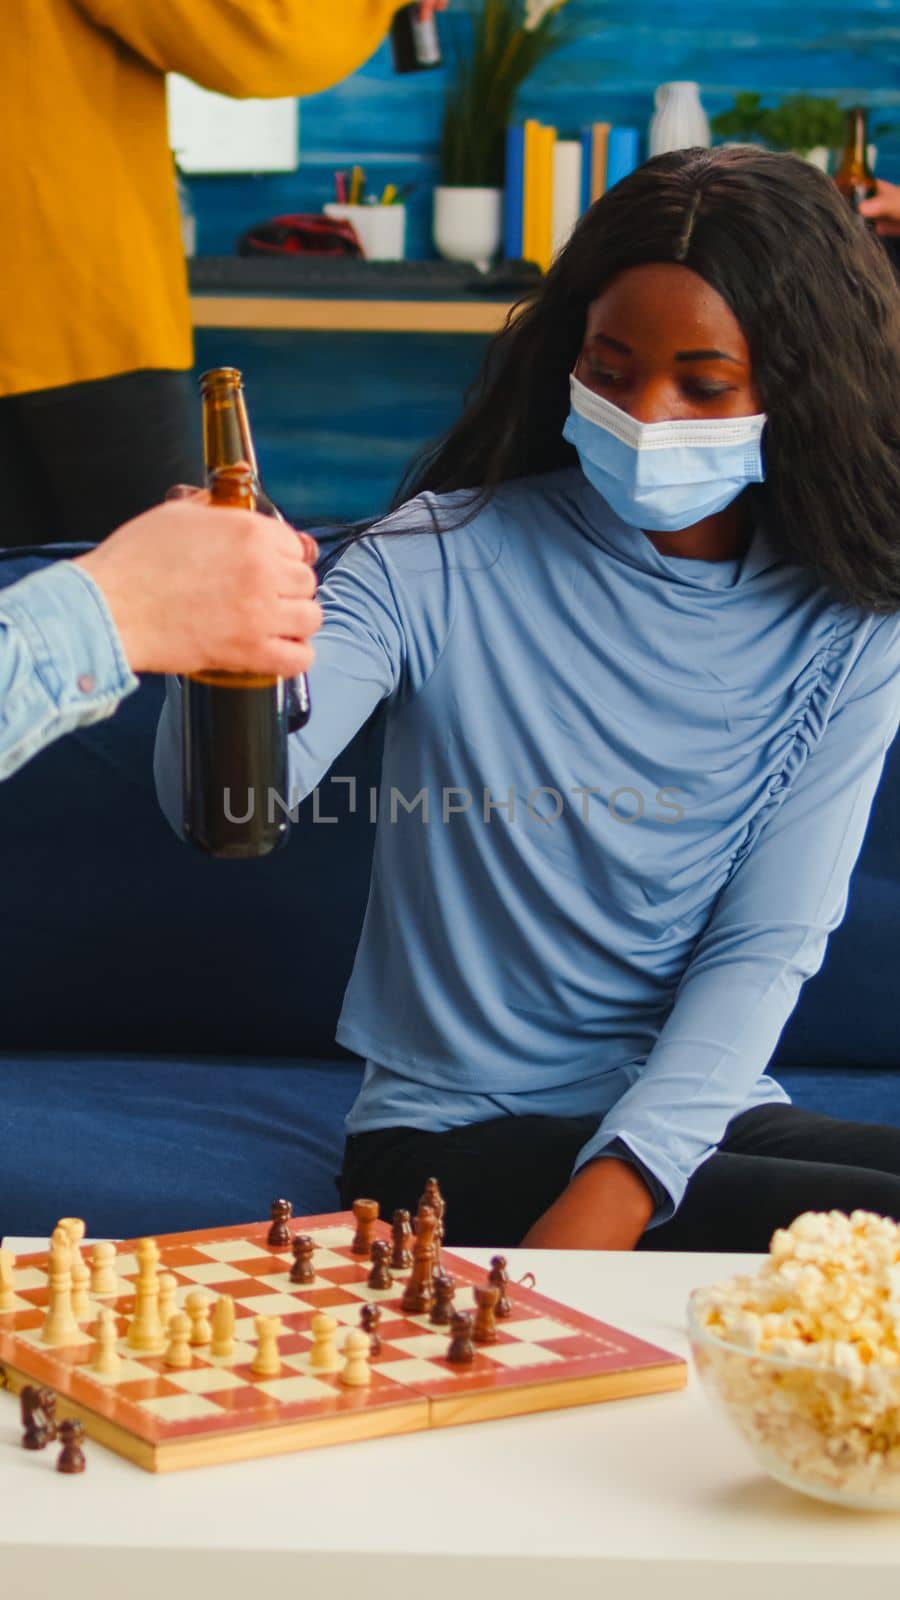 Man holding beer bottle playing chess with african woman in living room keeping social distancing due to covid19 pandemic wearing face mask to prevent infection. Diverse people enjoying board games